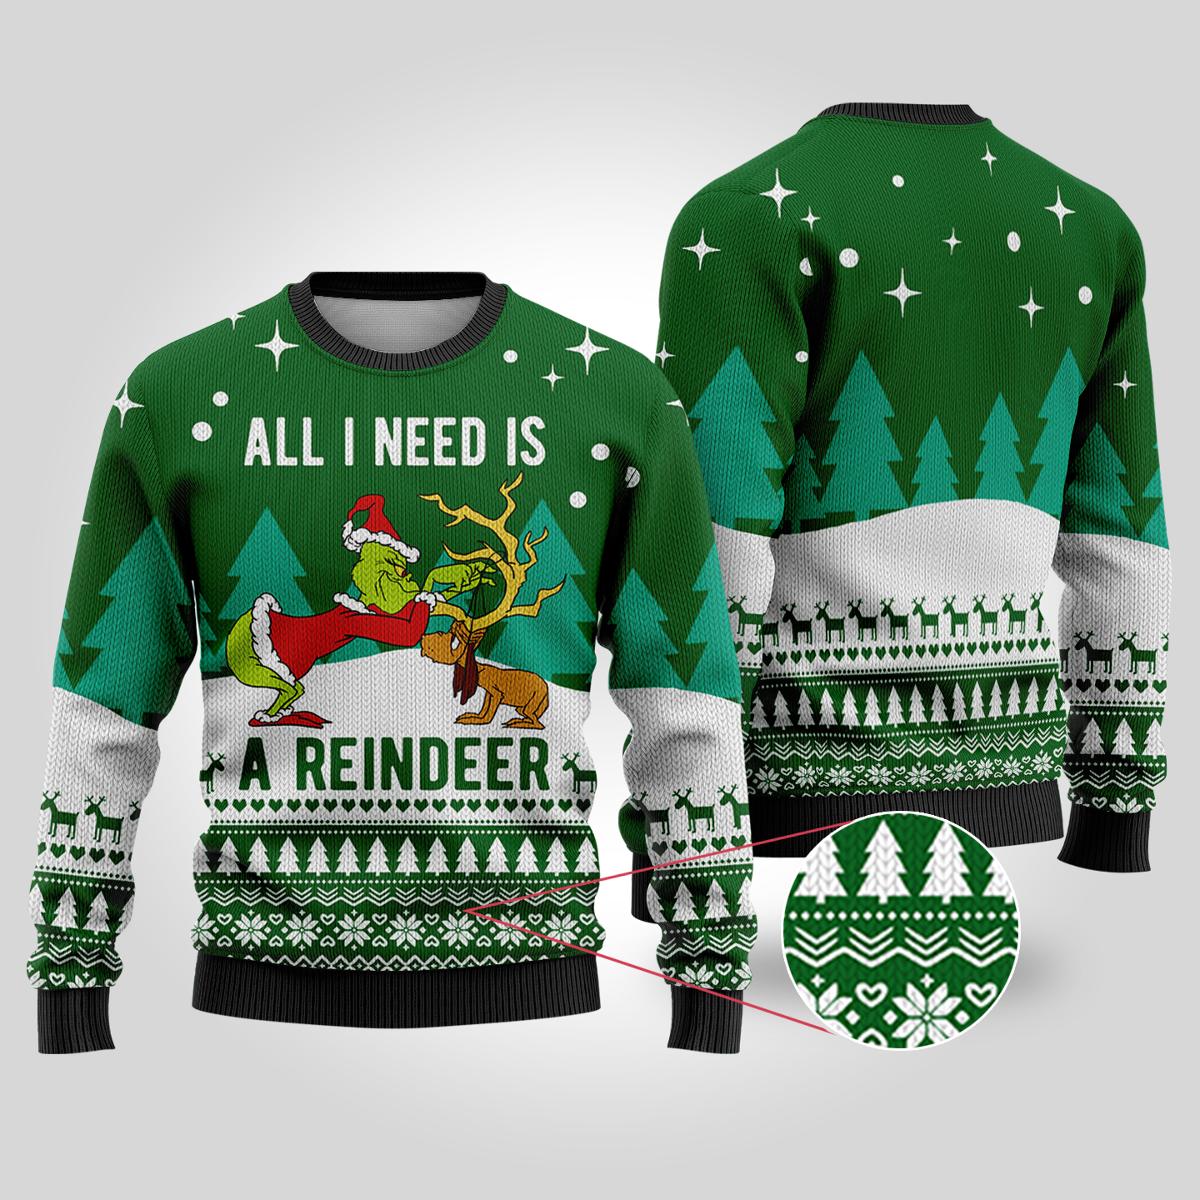 King Of Sinful Sots Grinch Christmas Sweater